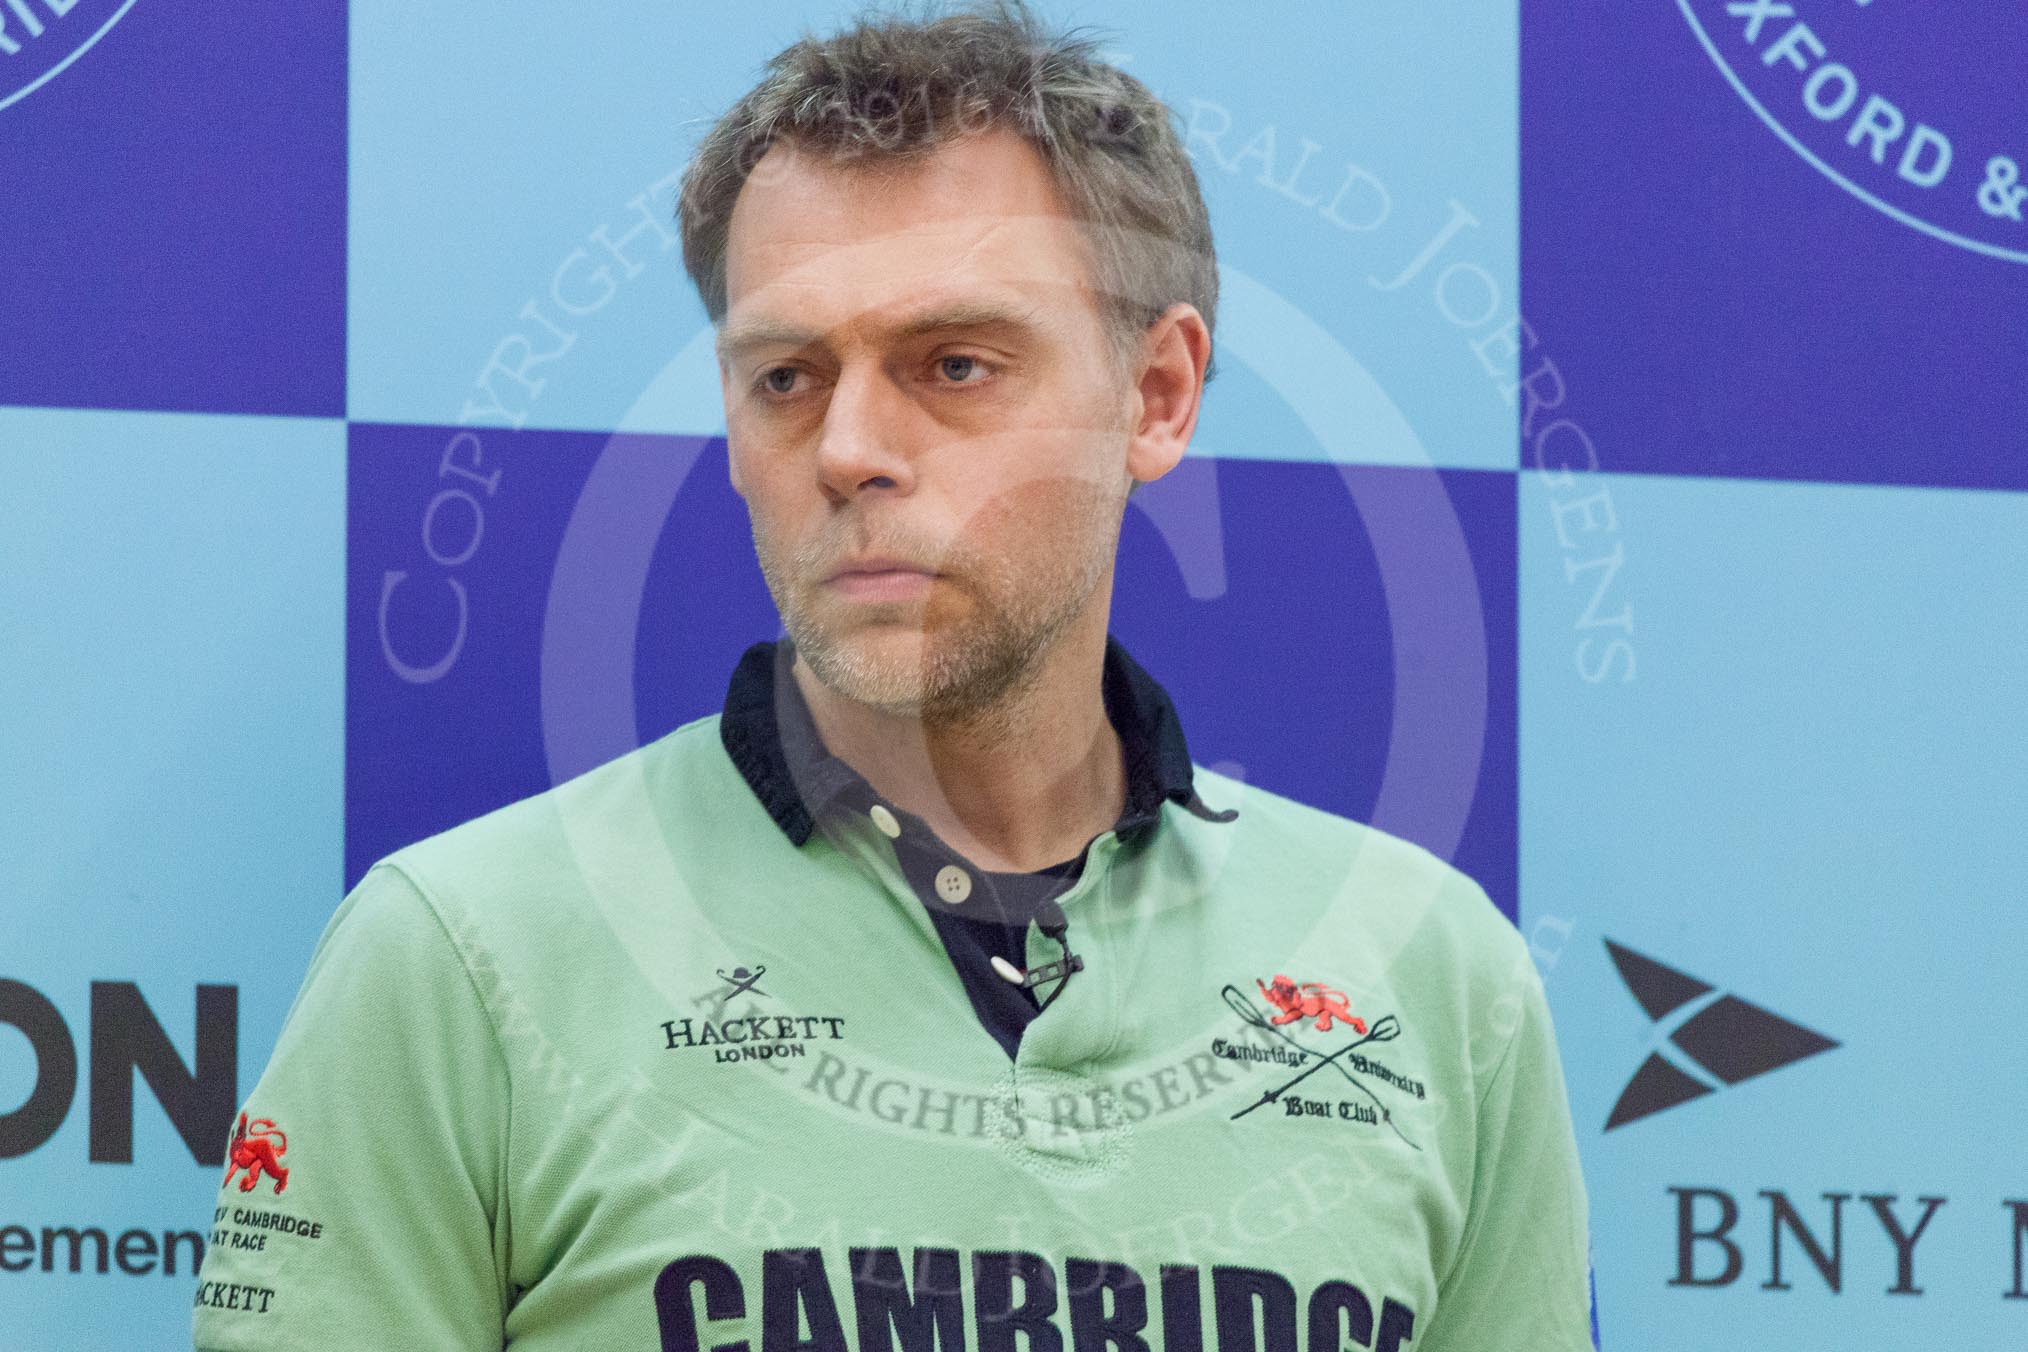 The Boat Race season 2016 - Crew Announcement and Weigh-In: The Boat Race head coaches, here for Cambridge Steve Trapmore.
Westmister Hall, Westminster,
London SW11,

United Kingdom,
on 01 March 2016 at 10:26, image #81